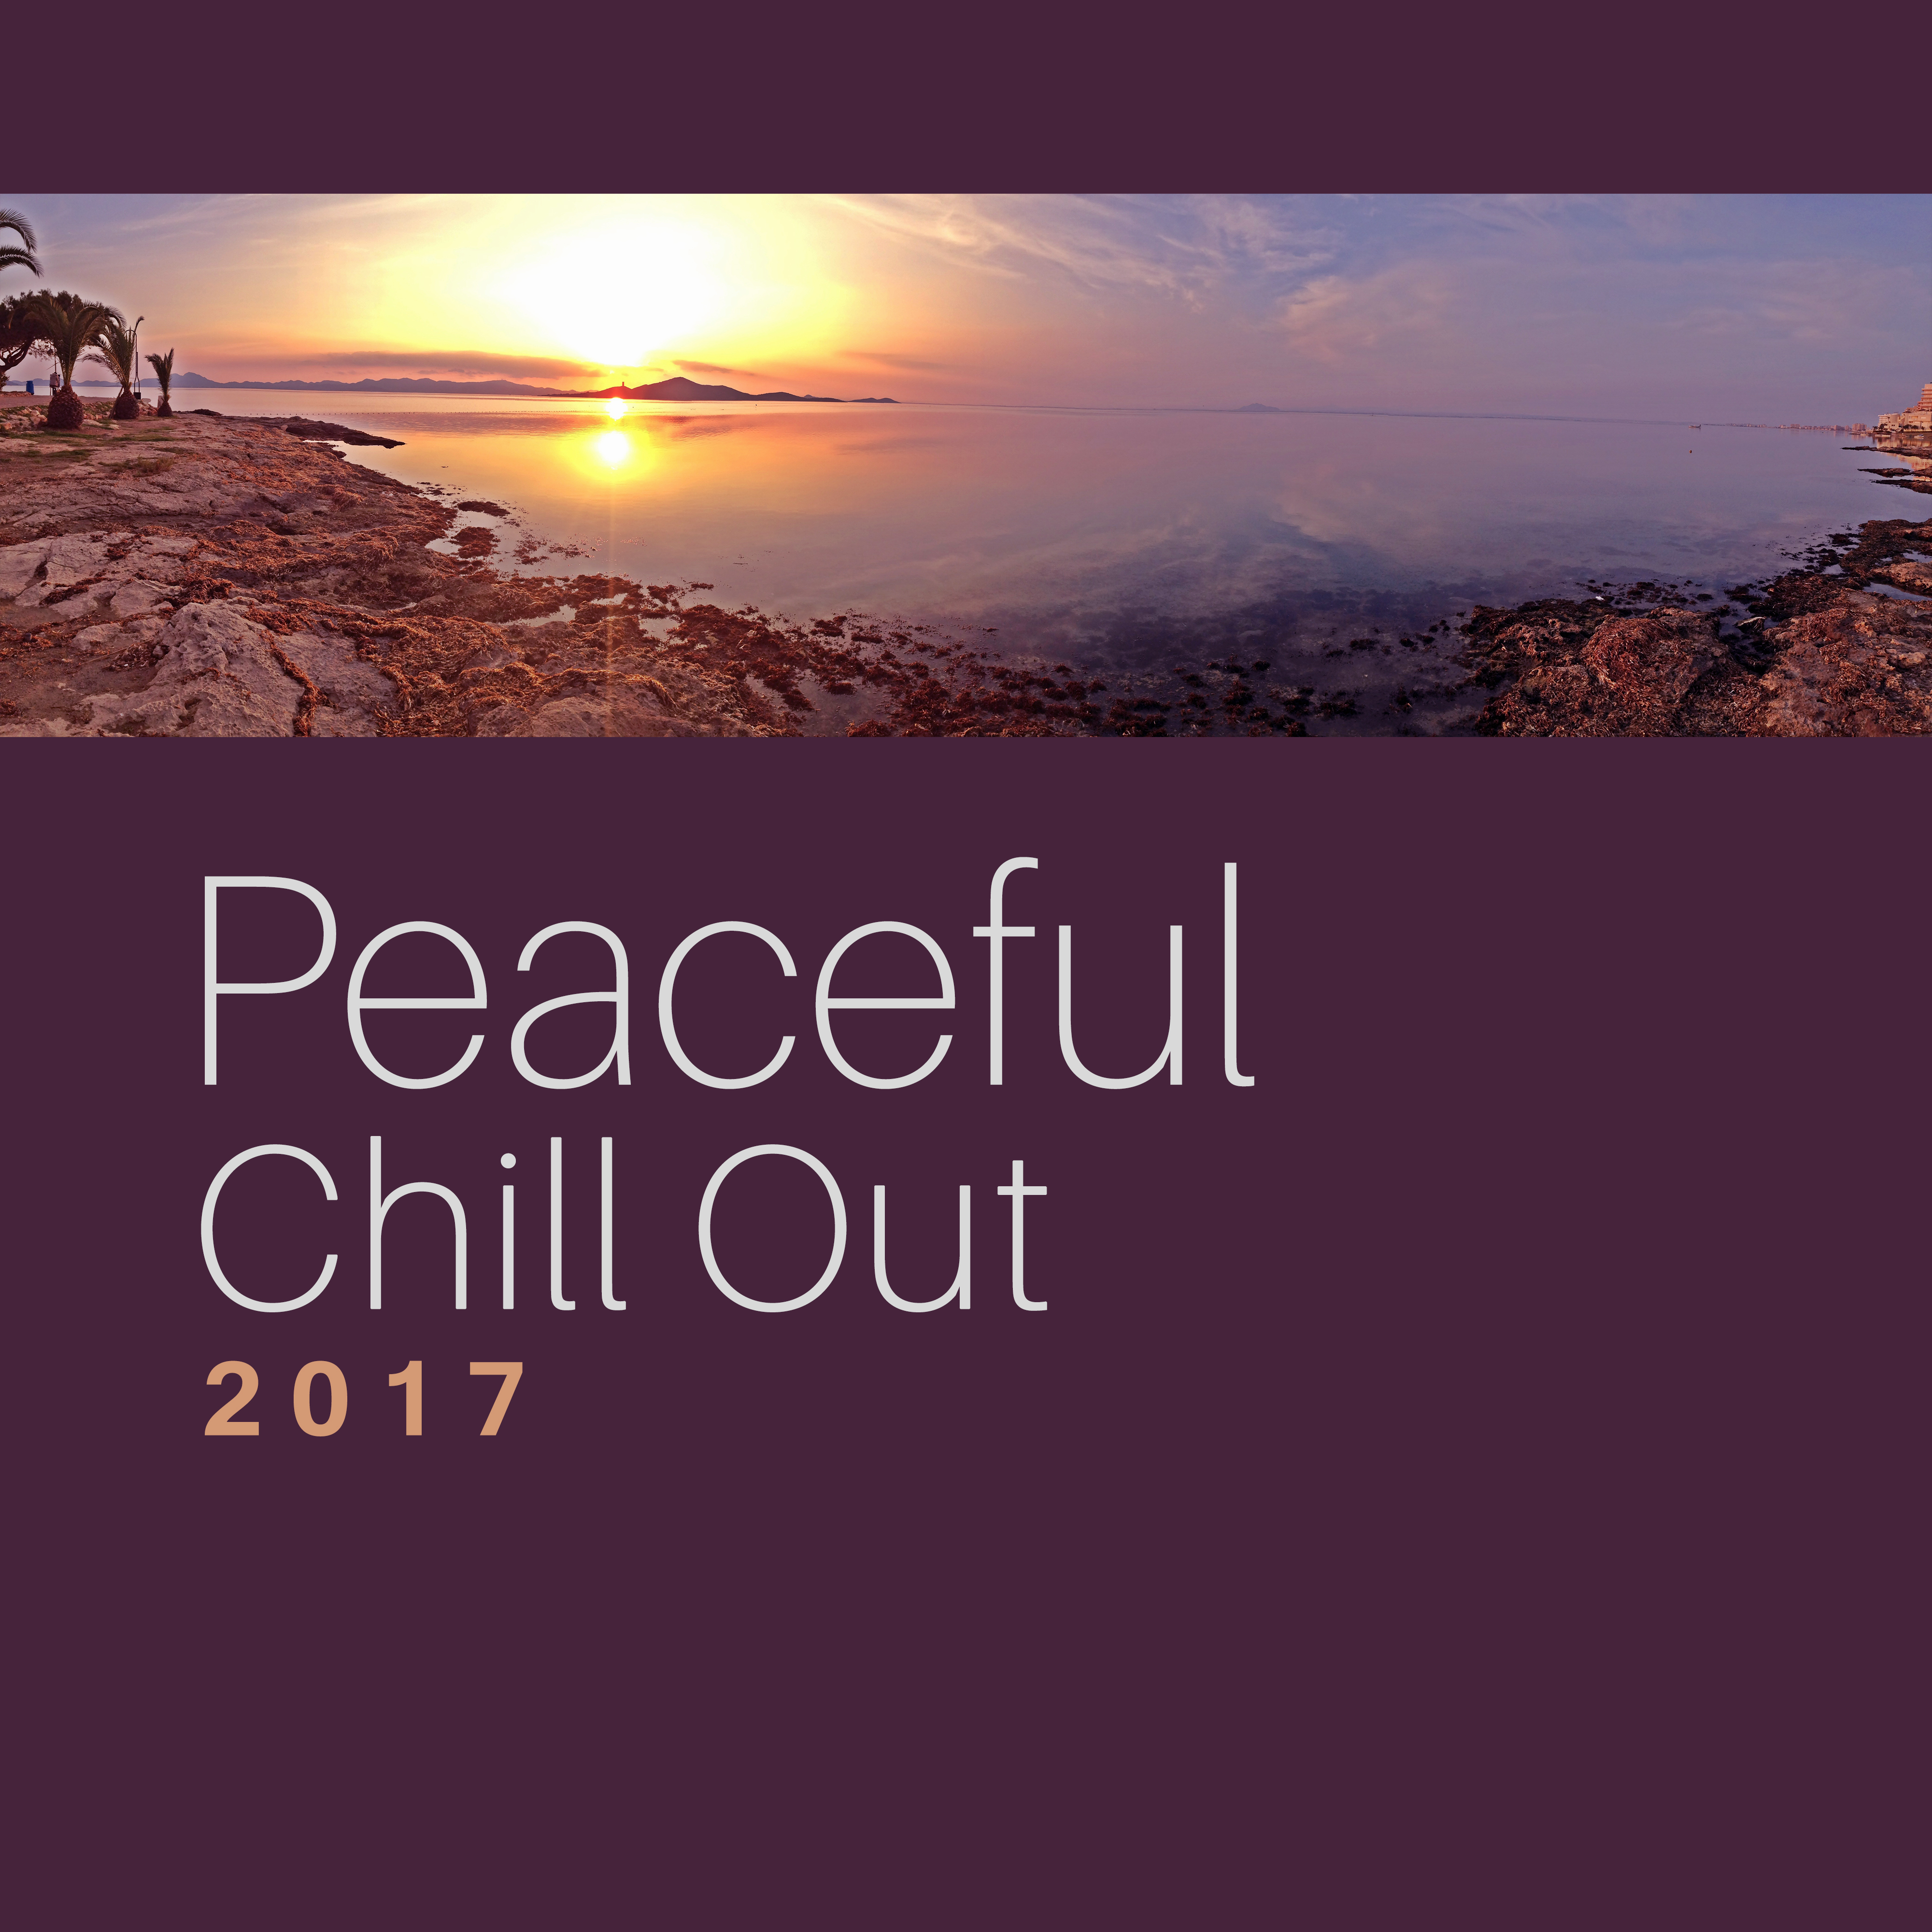 Peaceful Chill Out 2017  Summertime, Beach Chill, Stress Free, Relaxation, Chill Out Music to Calm Down, Soft Vibes